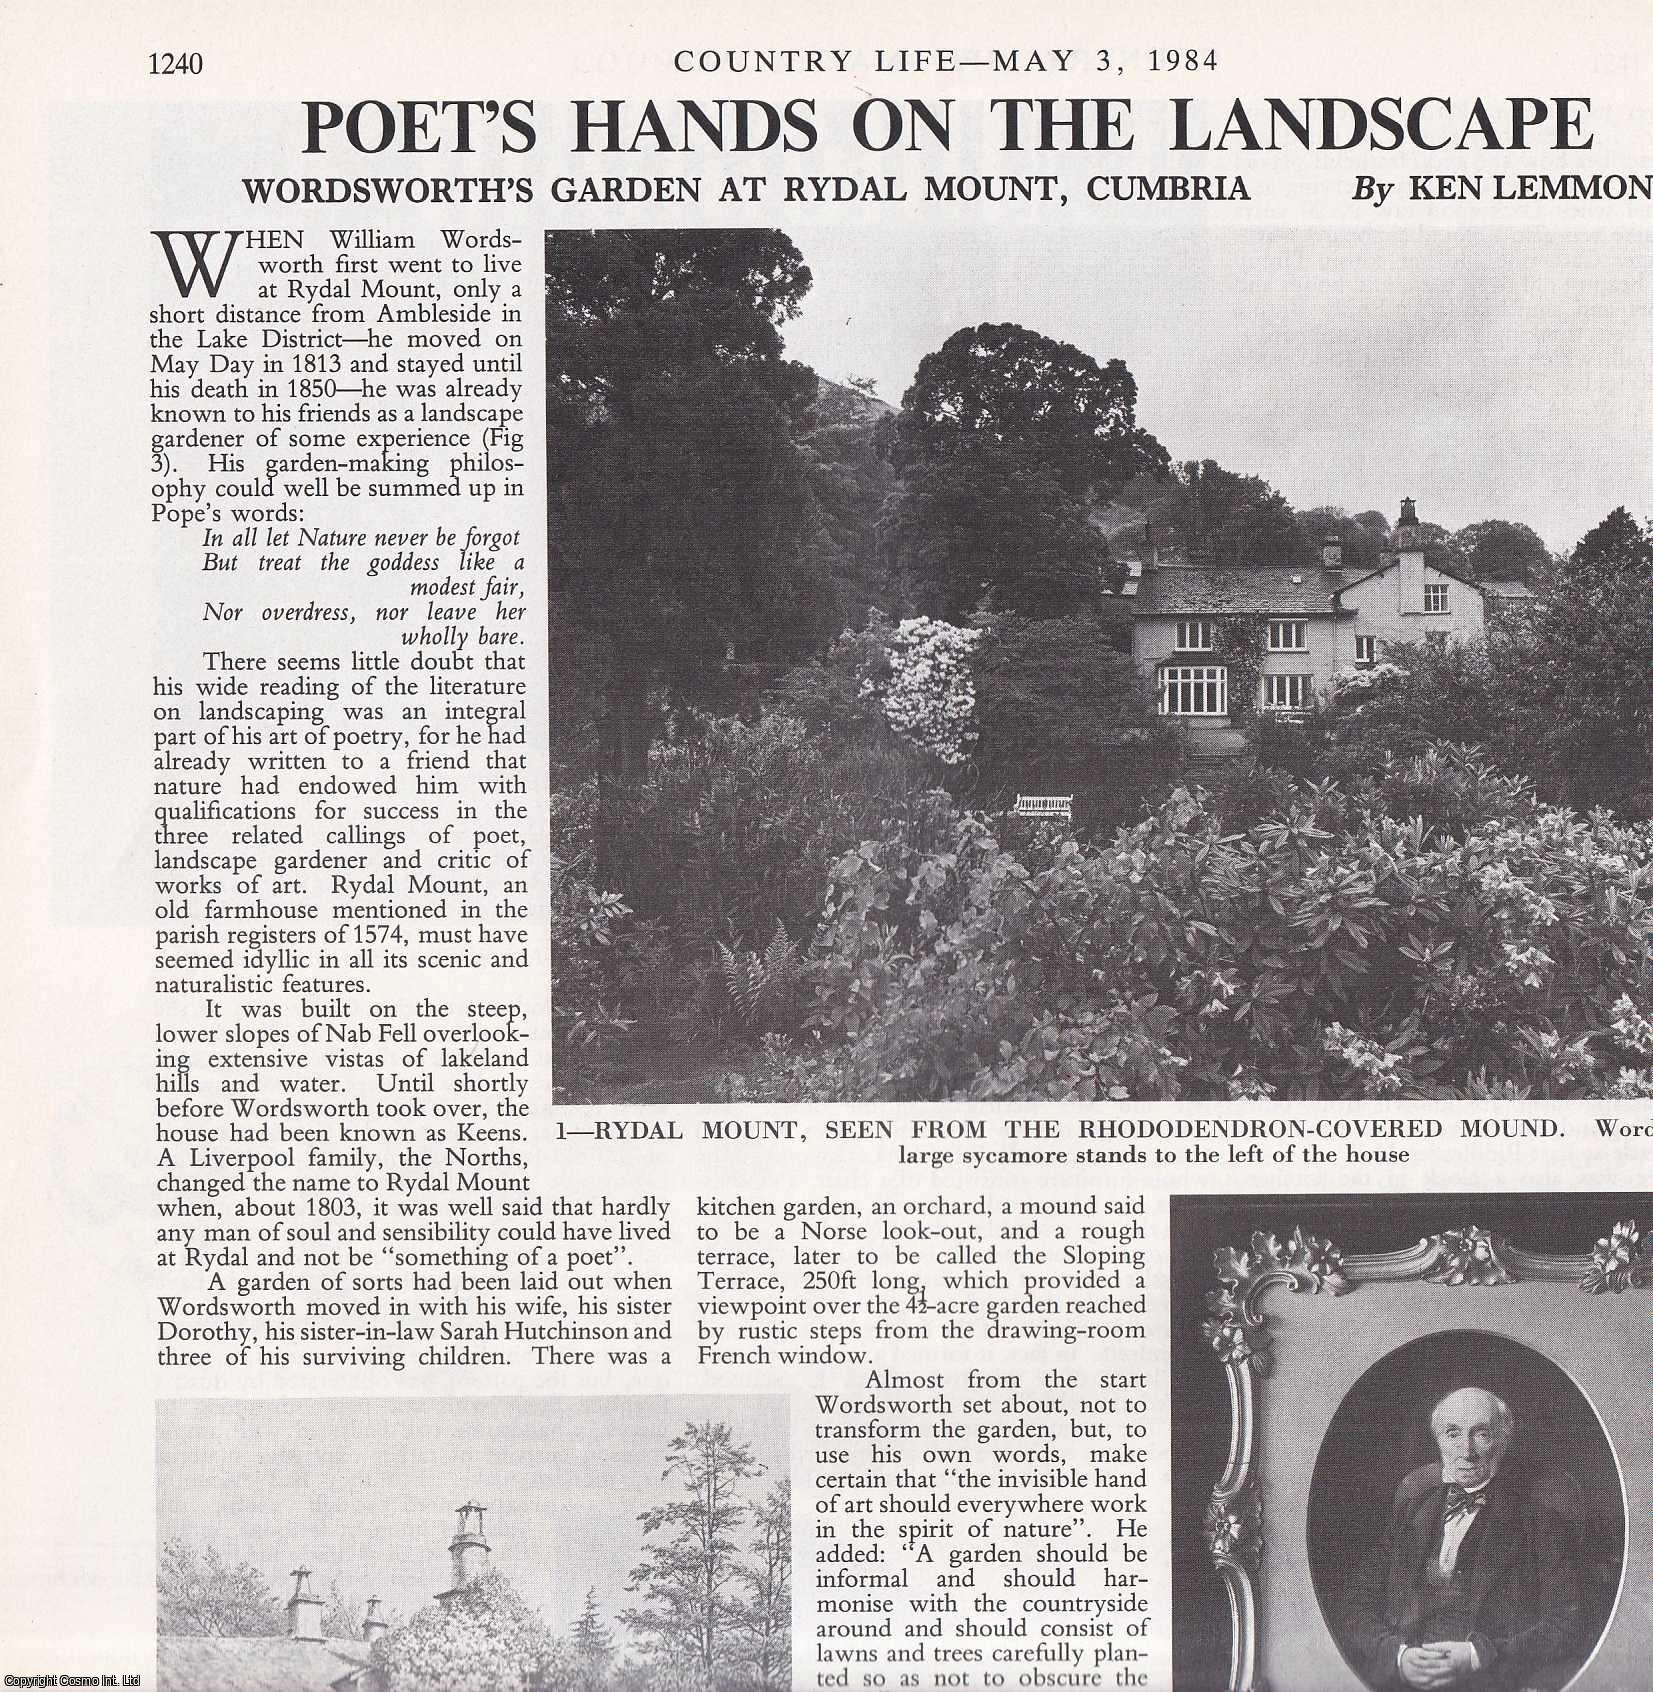 Ken Lemmon - Wordsworth's Garden at Rydal Mount, Cumbria. Several pictures and accompanying text, removed from an original issue of Country Life Magazine, 1984.